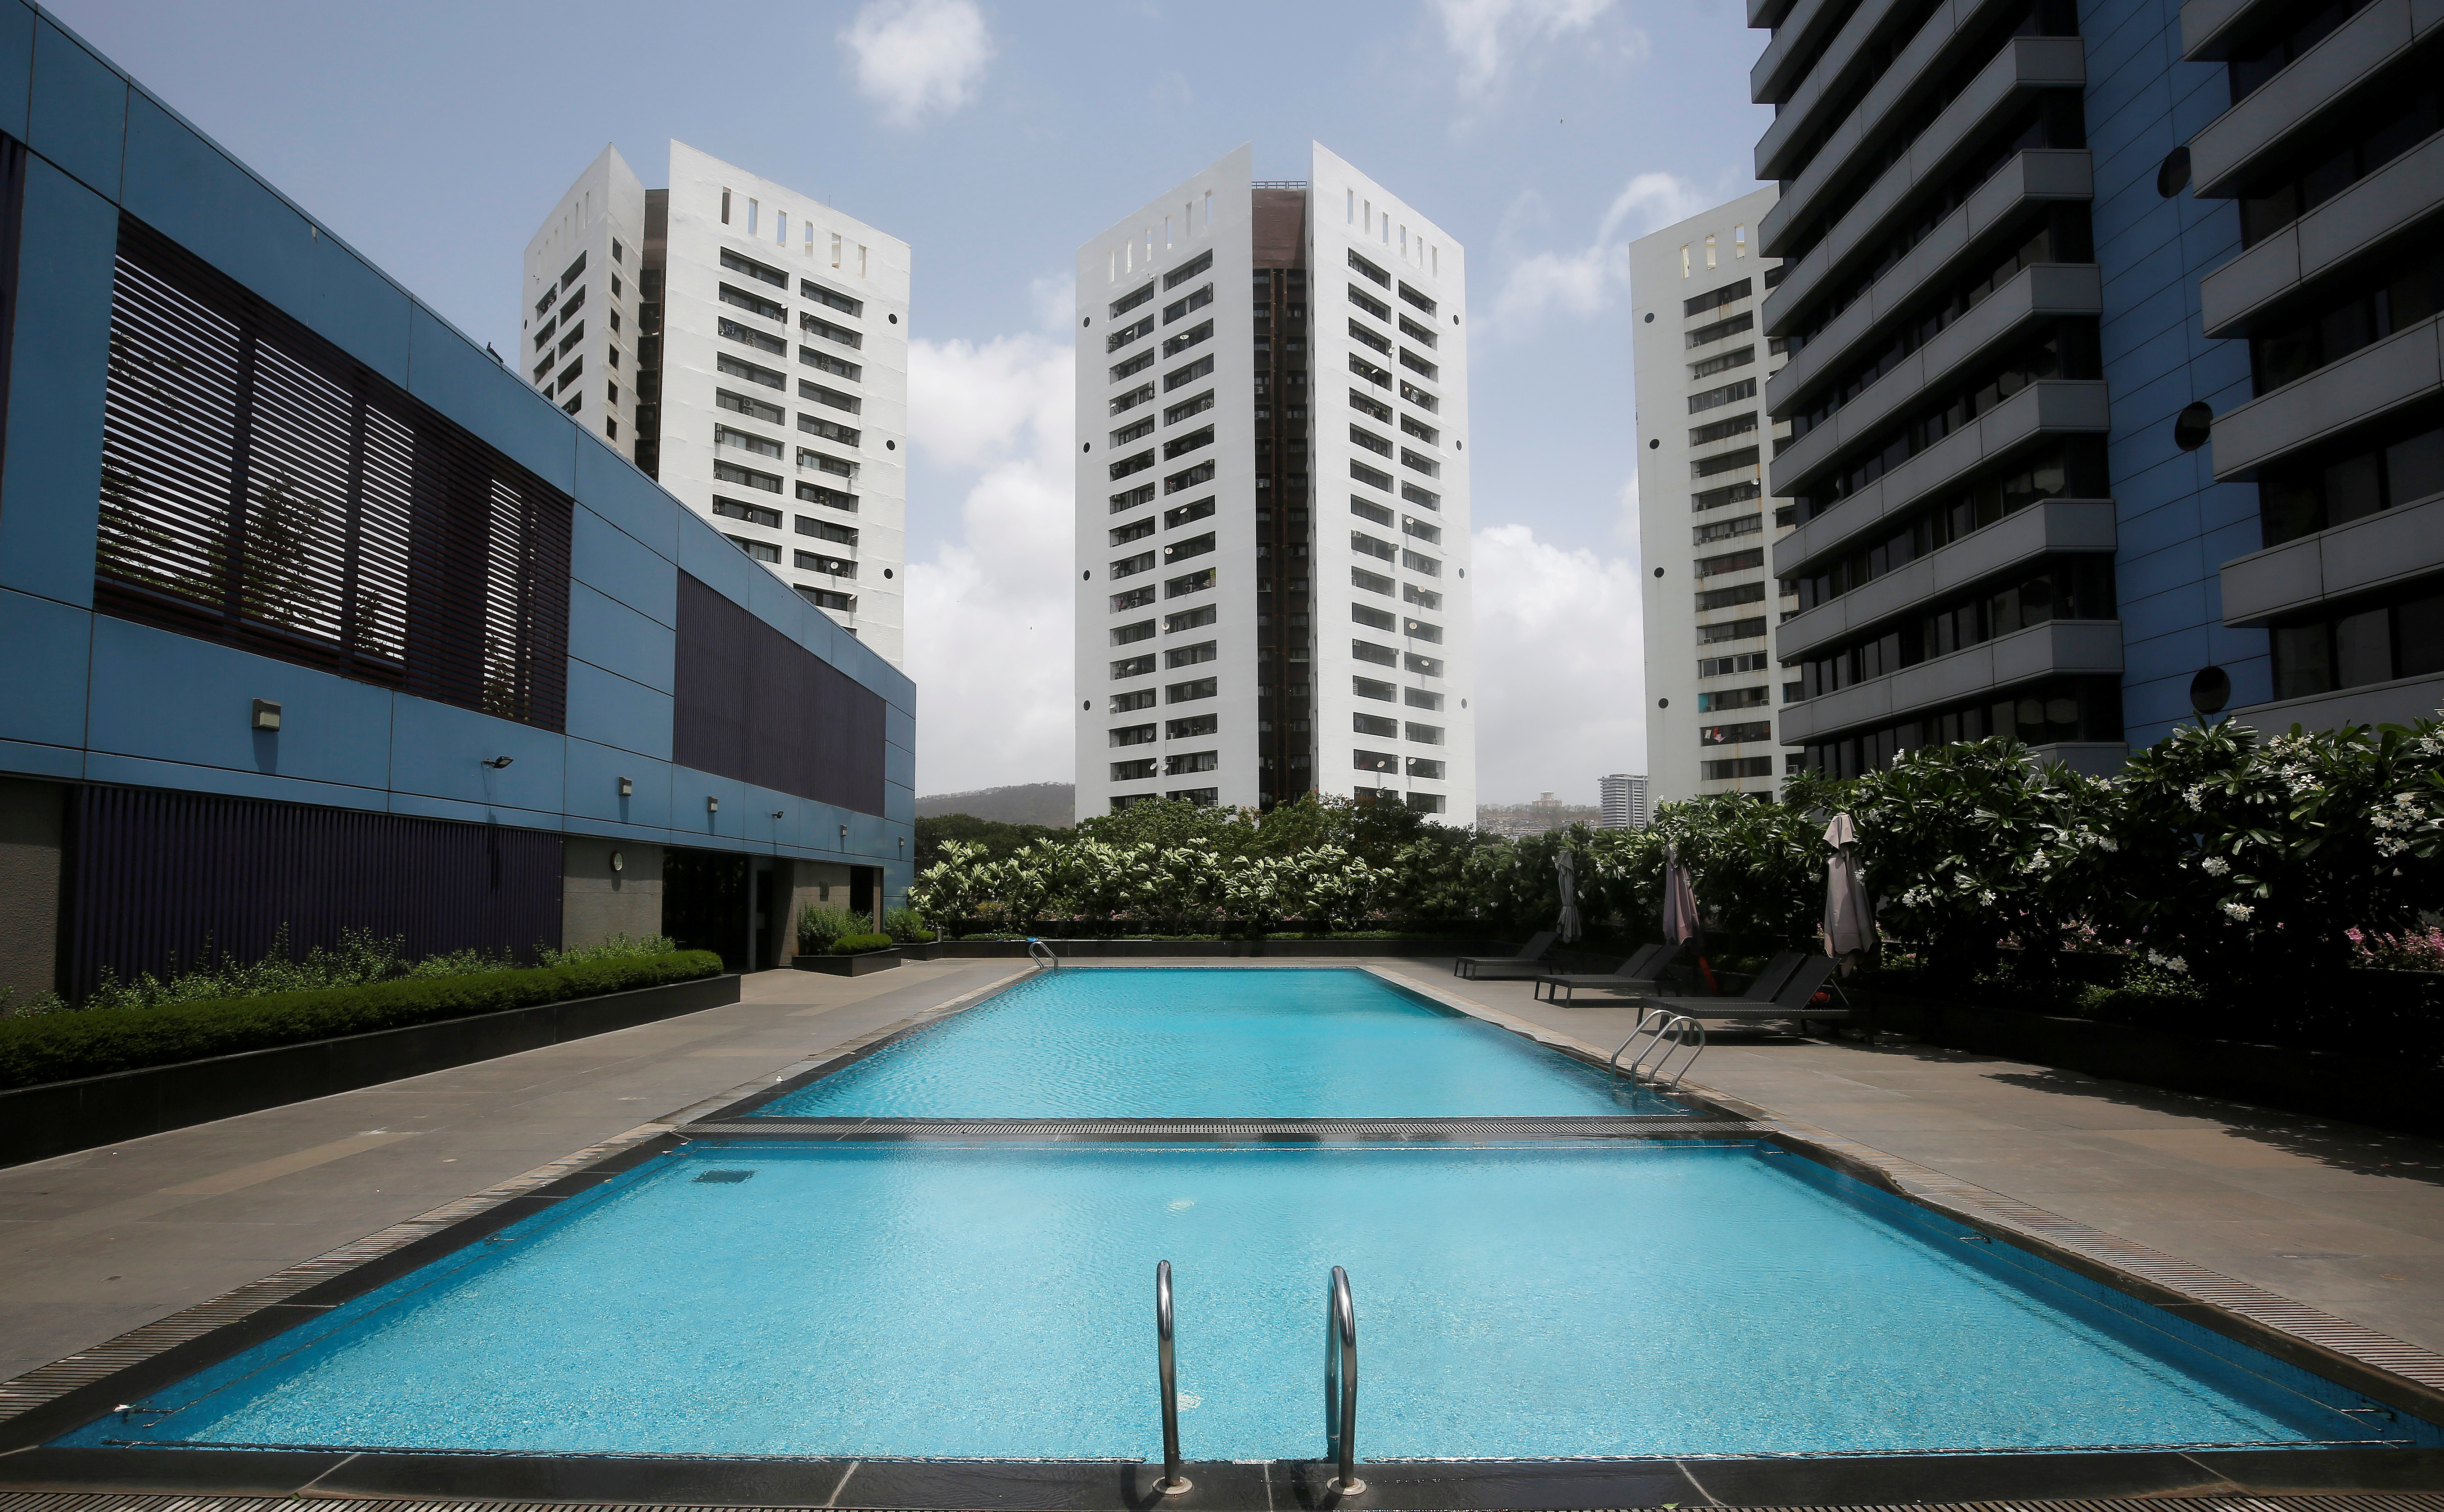 A swimming pool is seen inside the Godrej Platinum residential complex in Mumbai